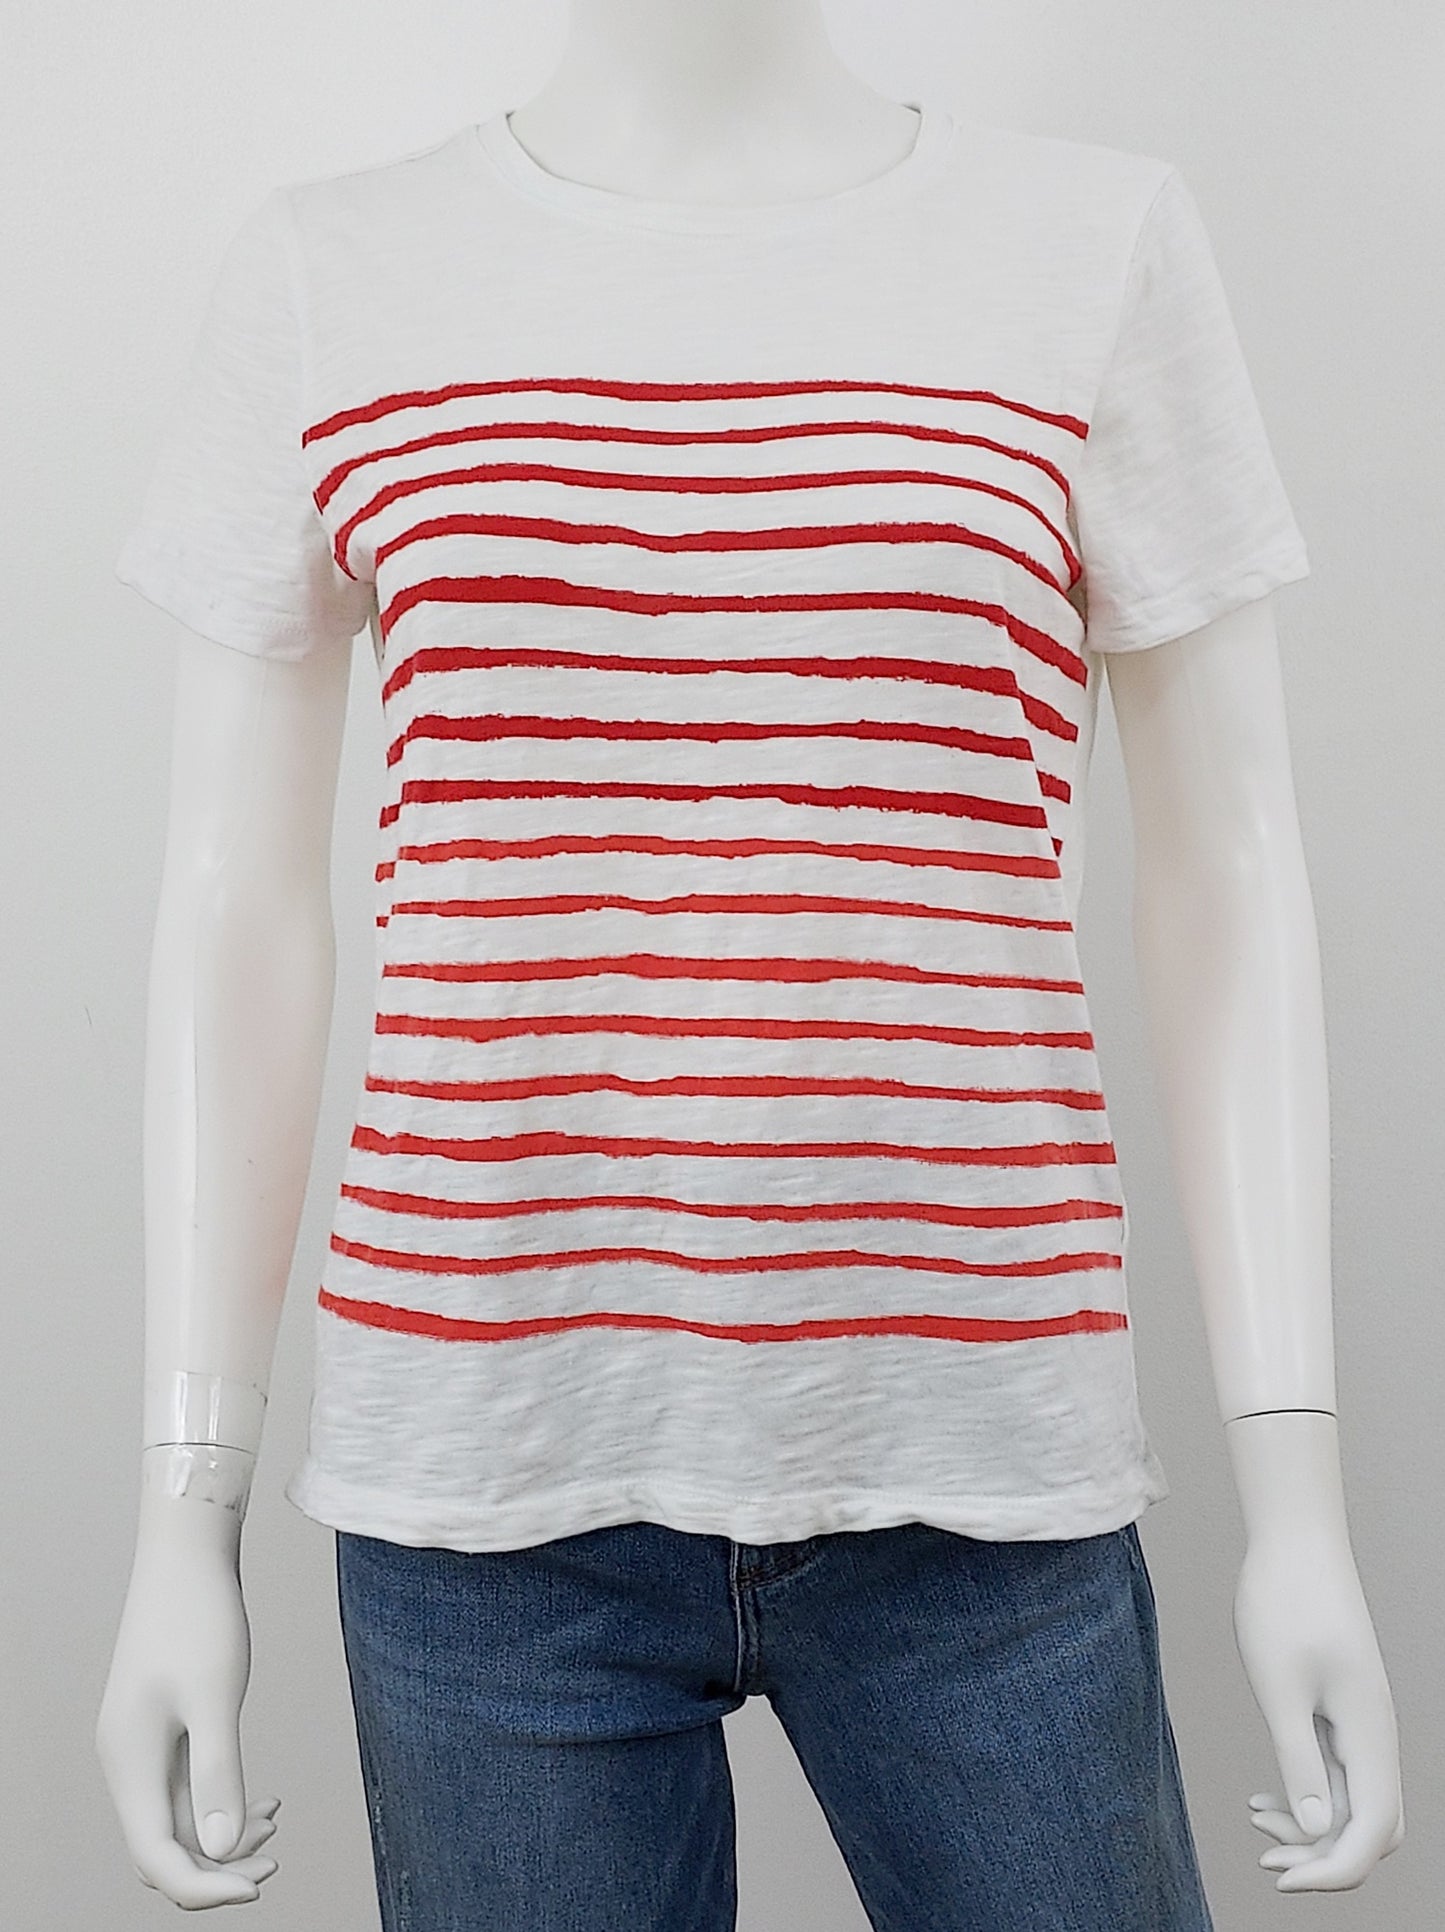 Striped Short Sleeve Tee Size Small